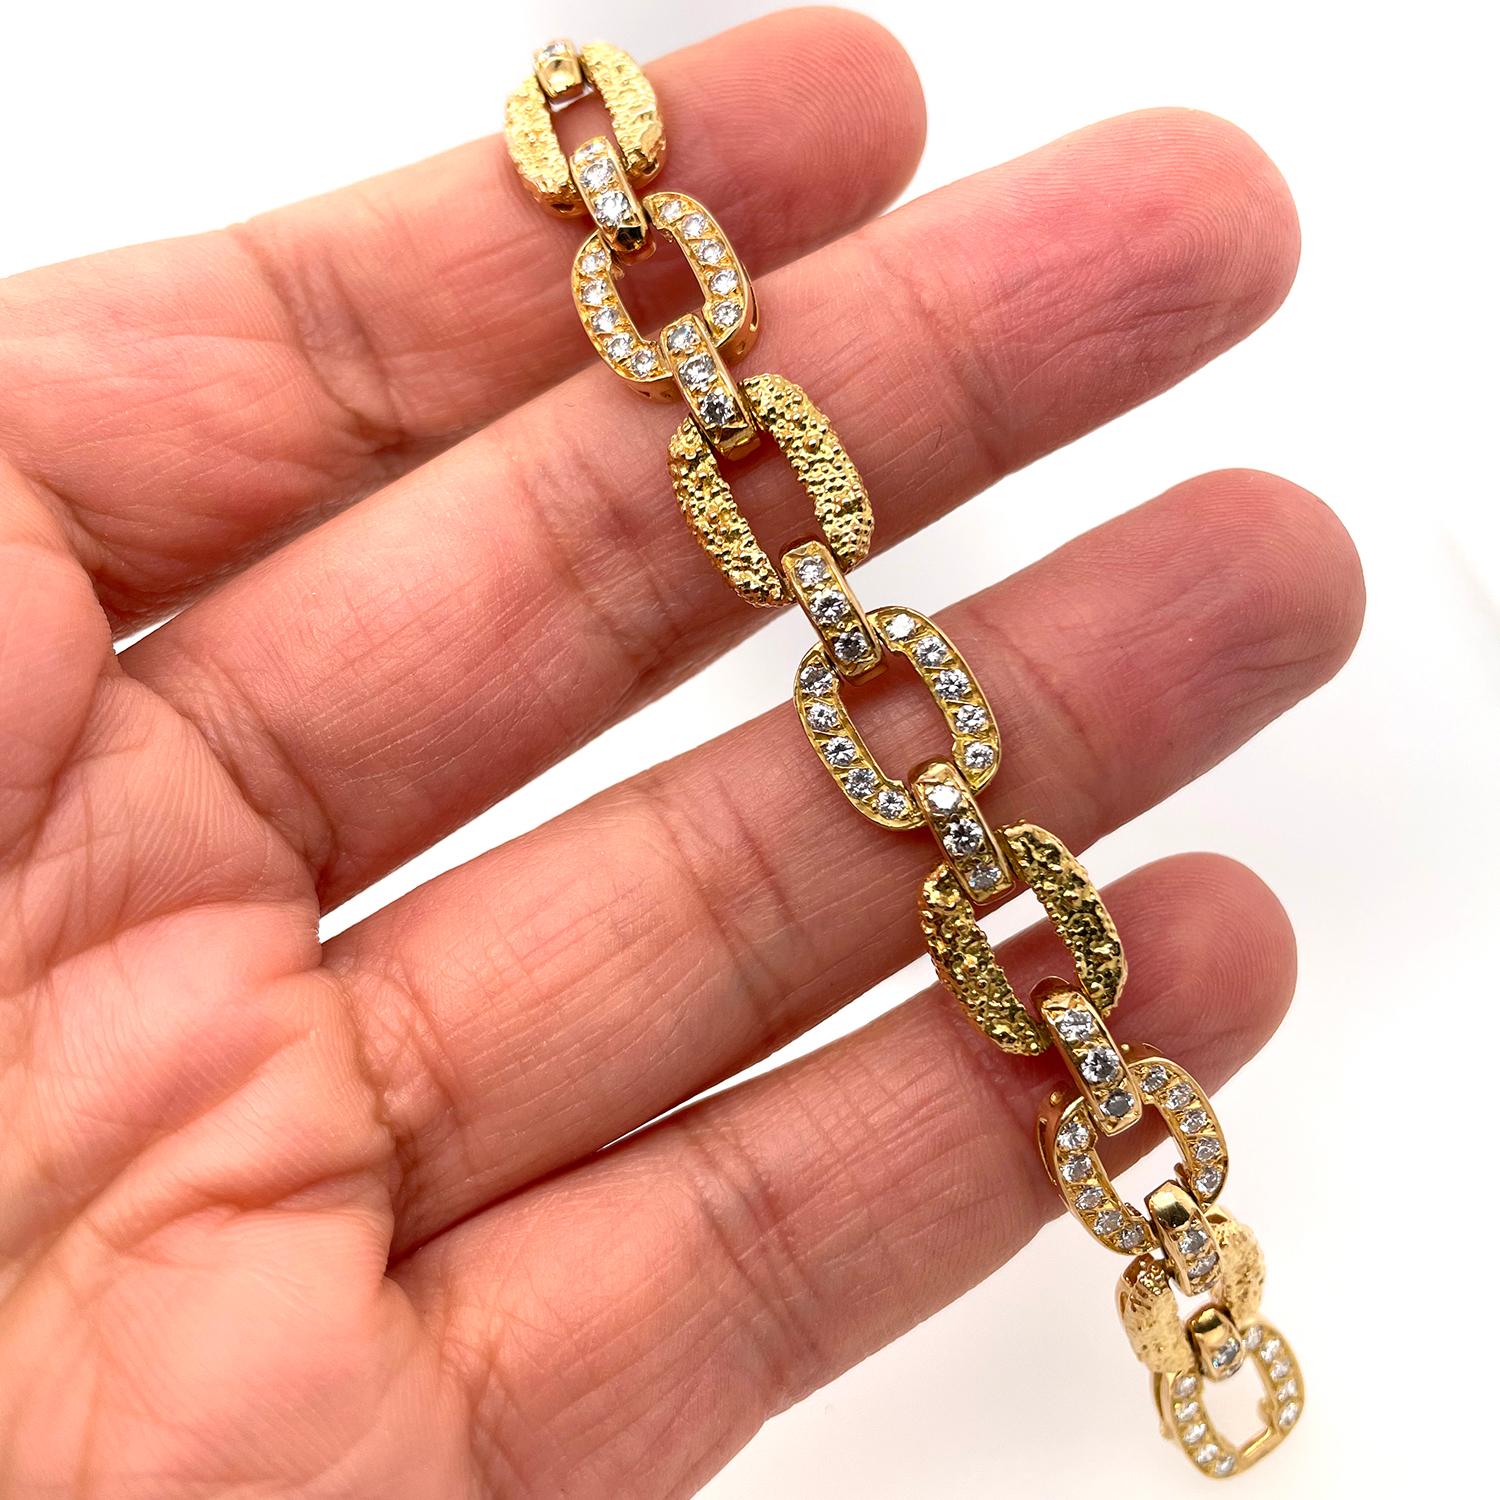 Retro Van Cleef and Arpels Diamond and Textured Gold Bracelet, ca. 1940s For Sale